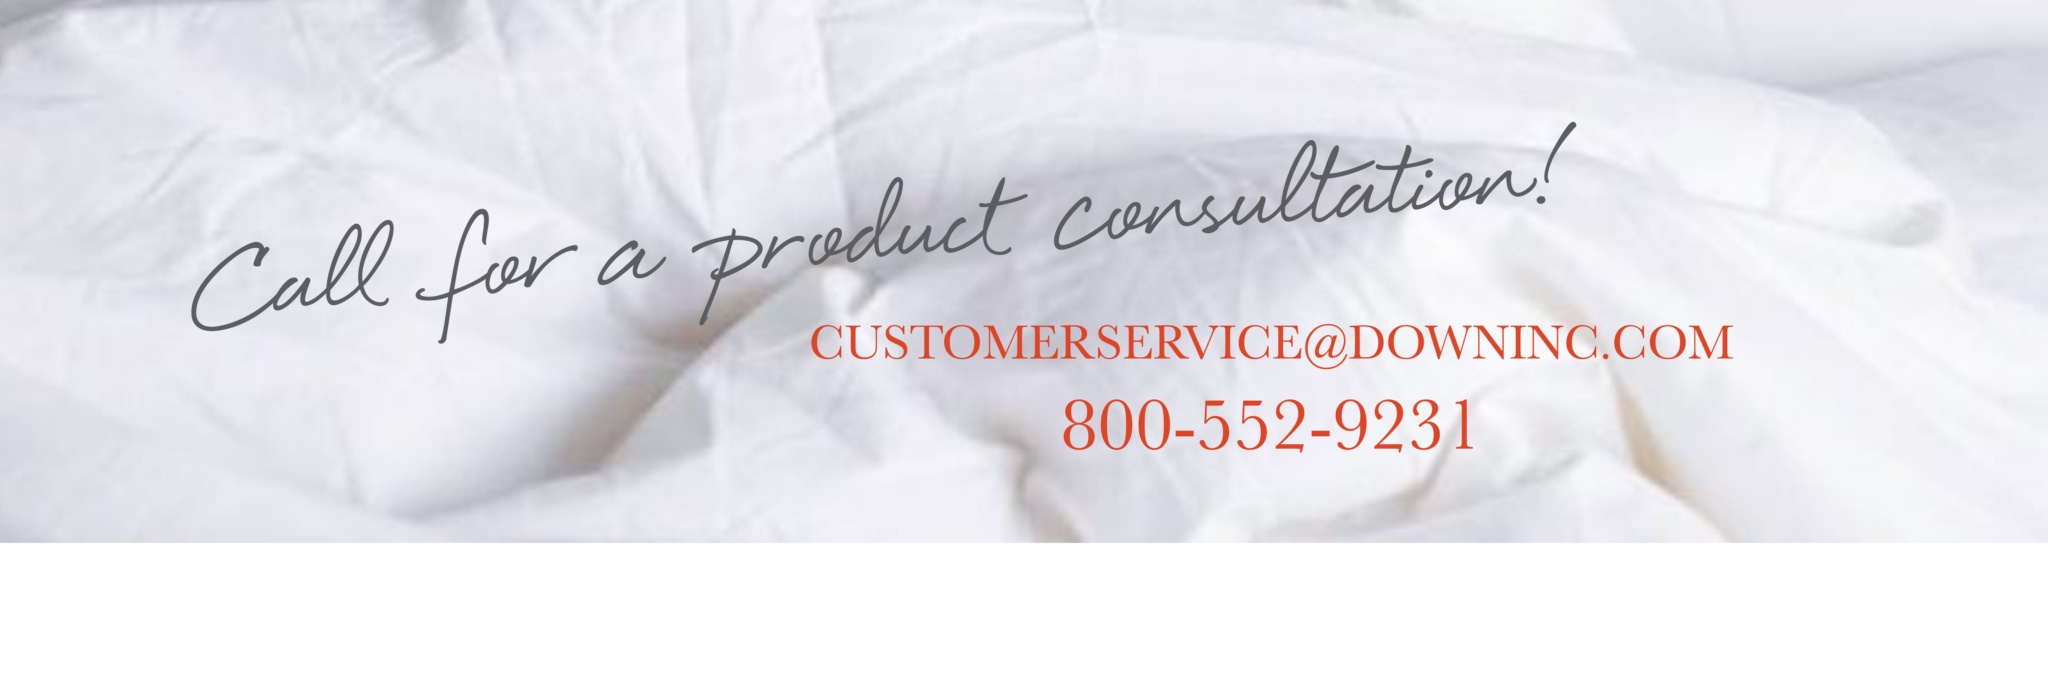 Call for a product consultation